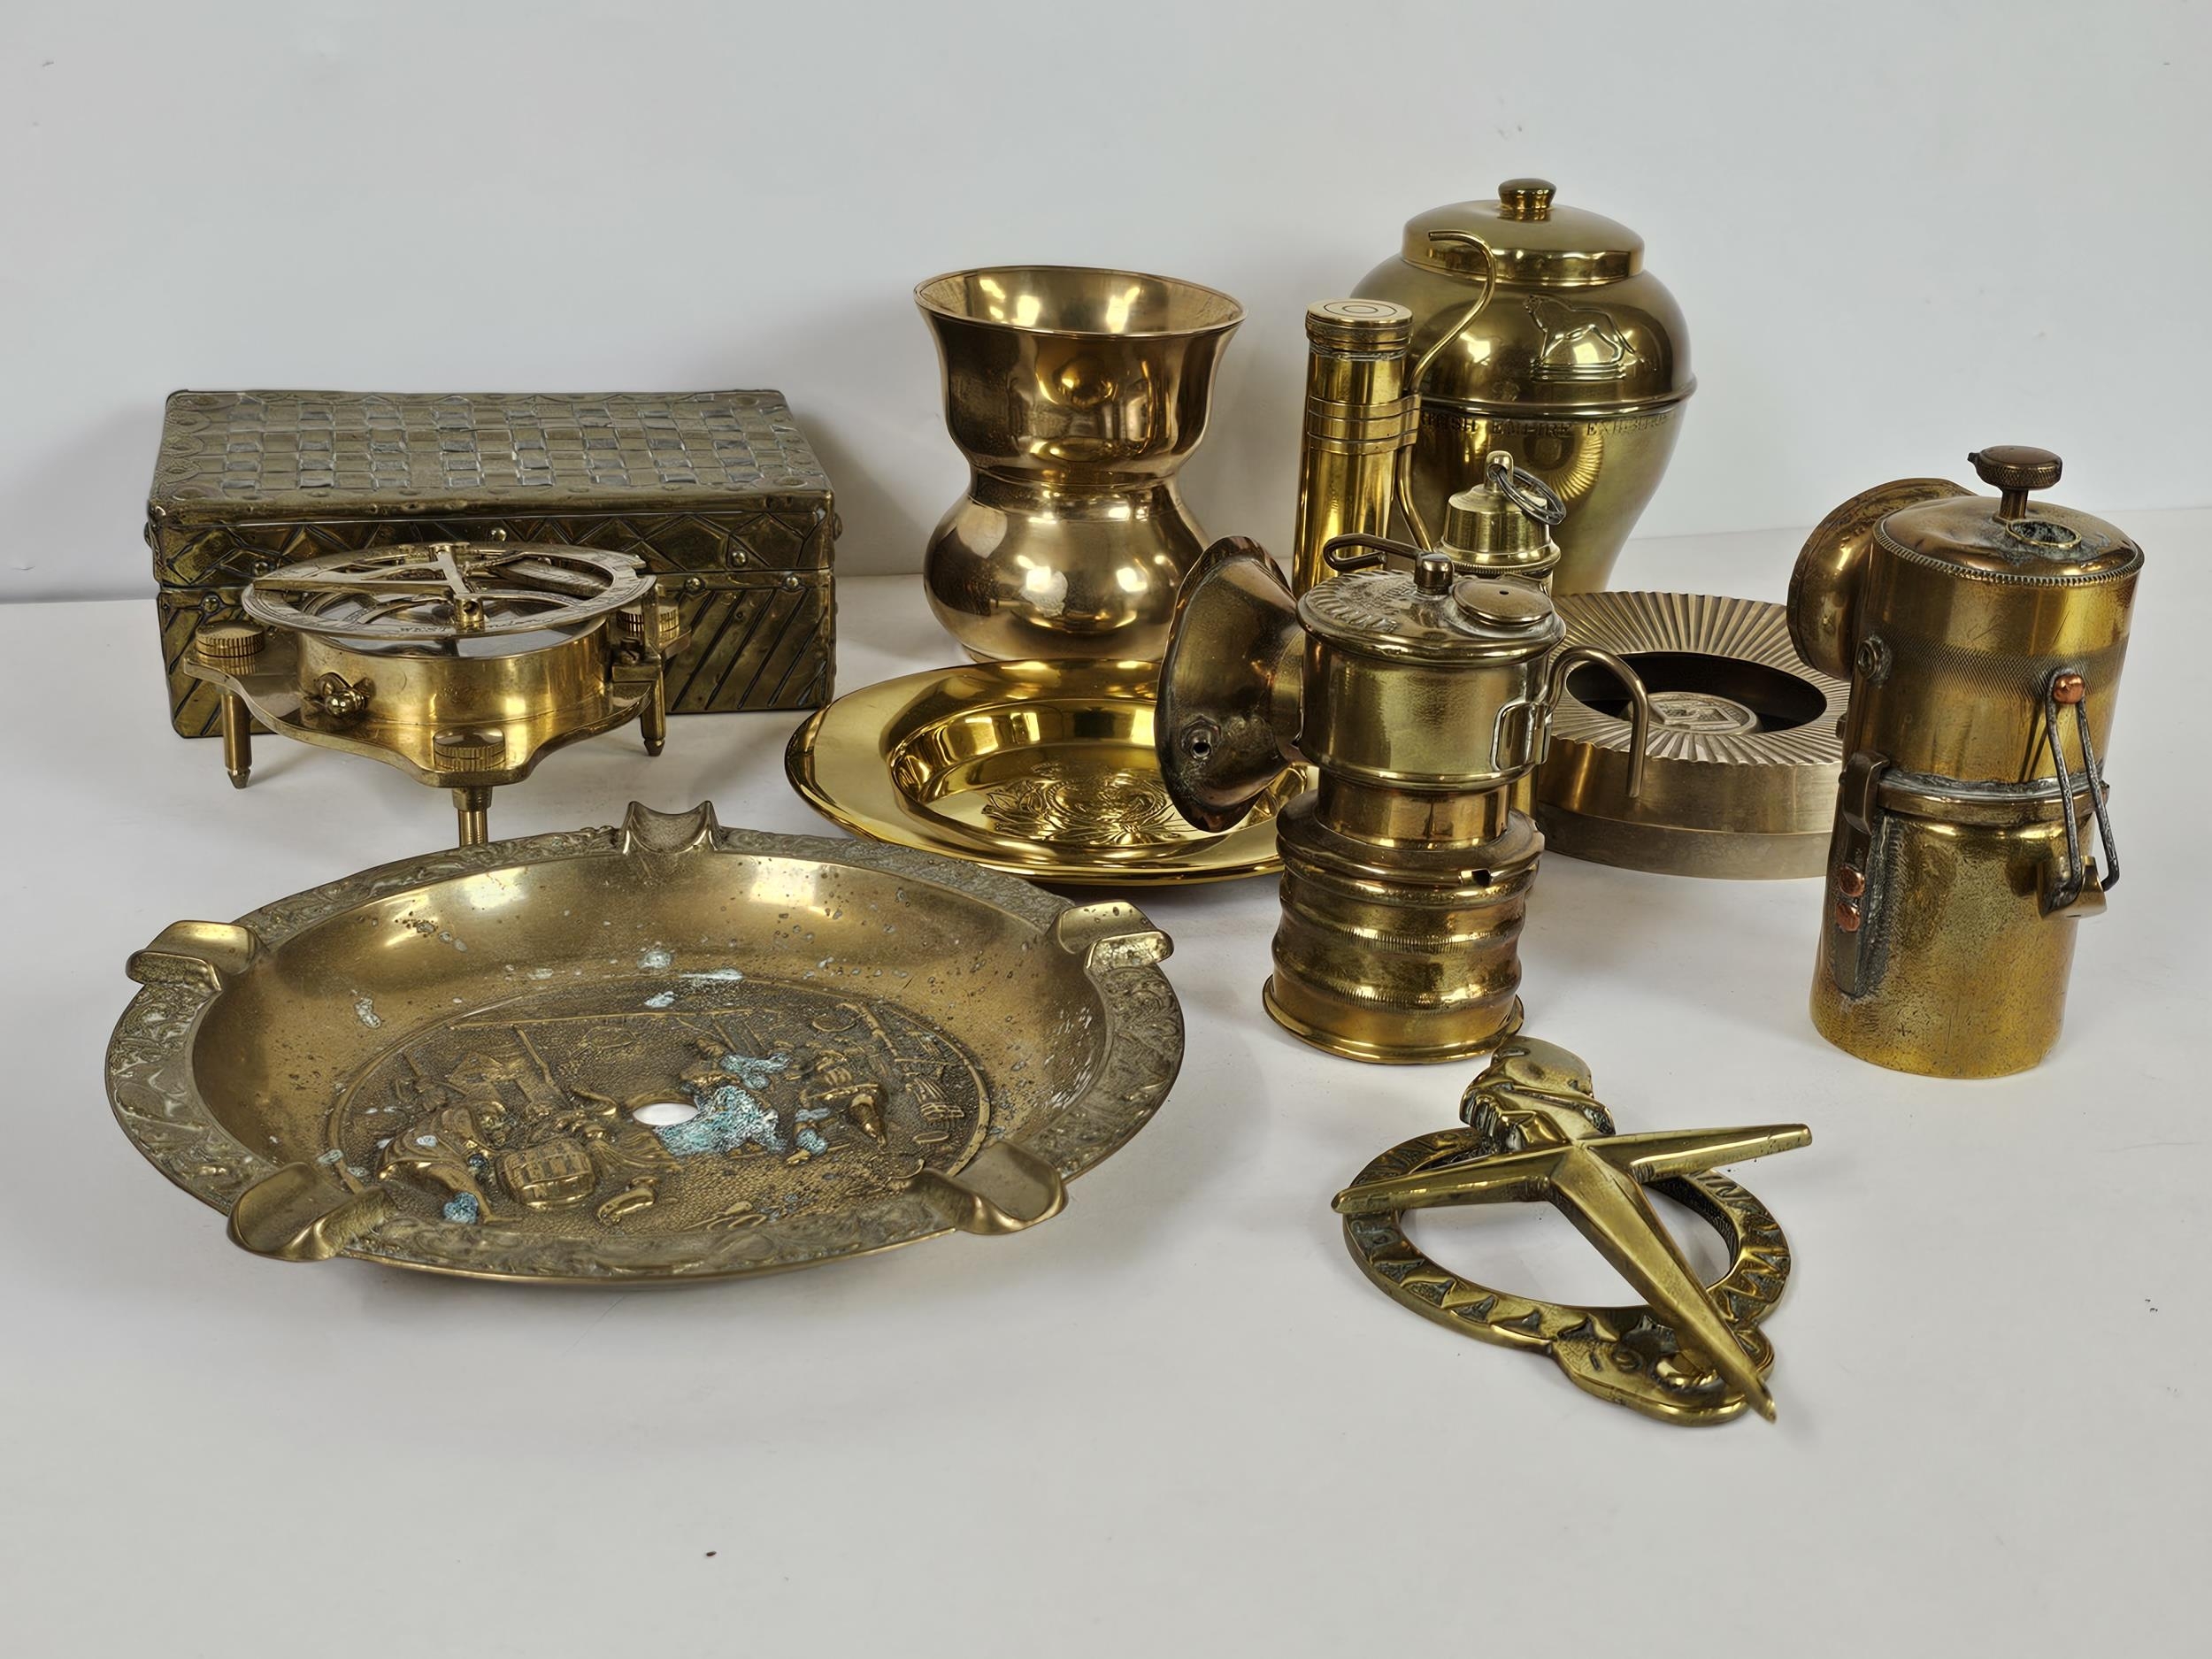 Large quantity of brass items including a Lipton British Empire Exhibition tea caddy and a desk - Image 2 of 7